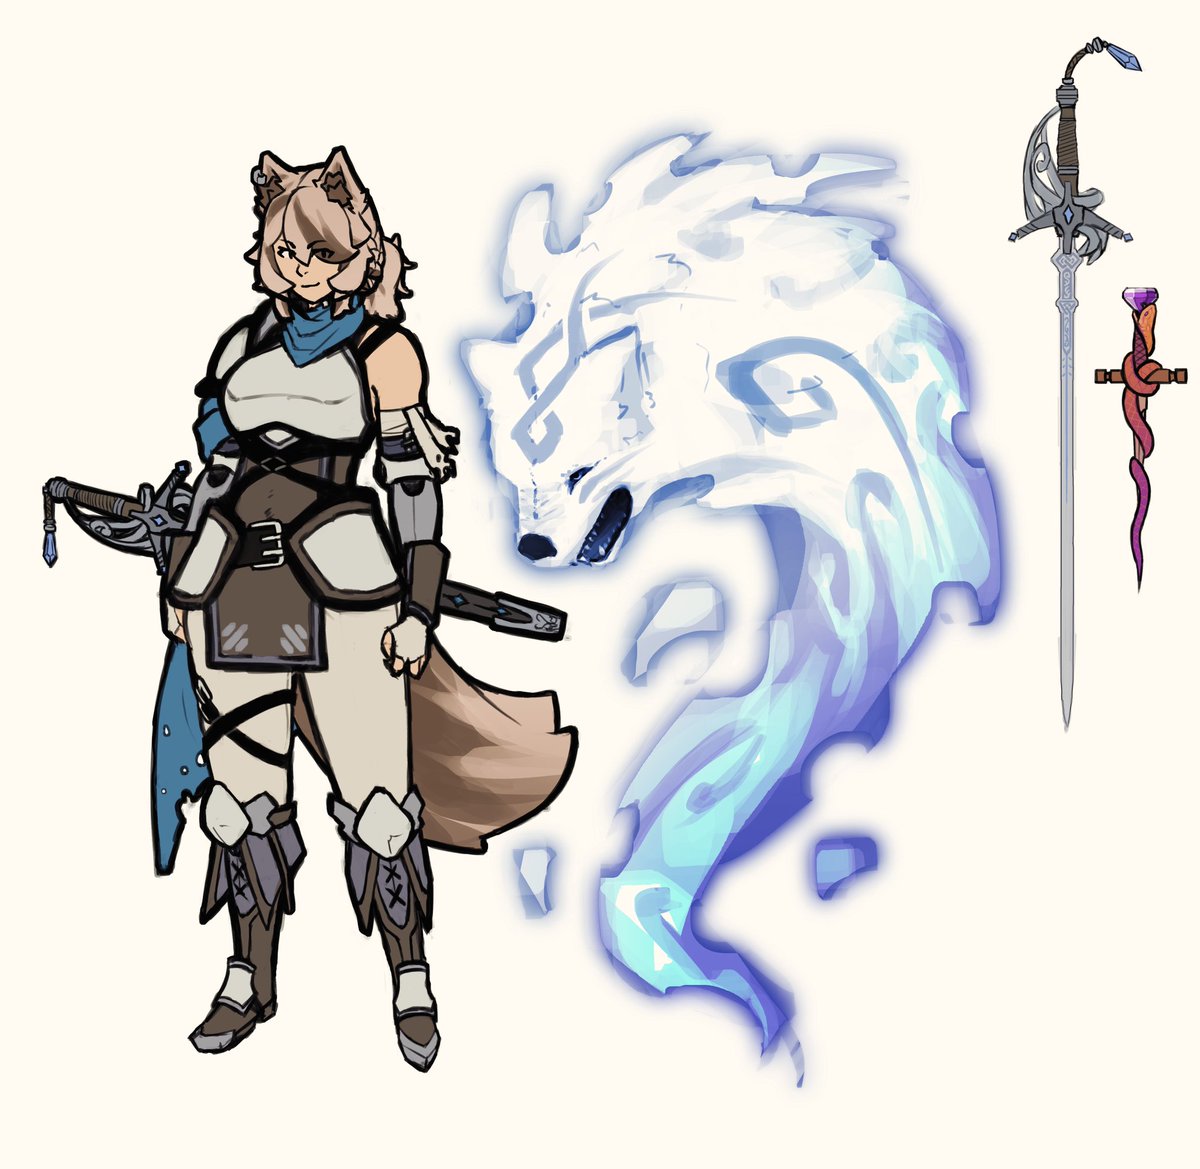 Final redesign for my dnd character Silvy! She's been in a campaign running just short of 3 years and it's all coming to an end in just a couple sessions 🥺

As of the end of the campaign she's a lv10 Thief Rogue and Lv 2 Echo Knight Fighter! It has been amazing playing her 💙